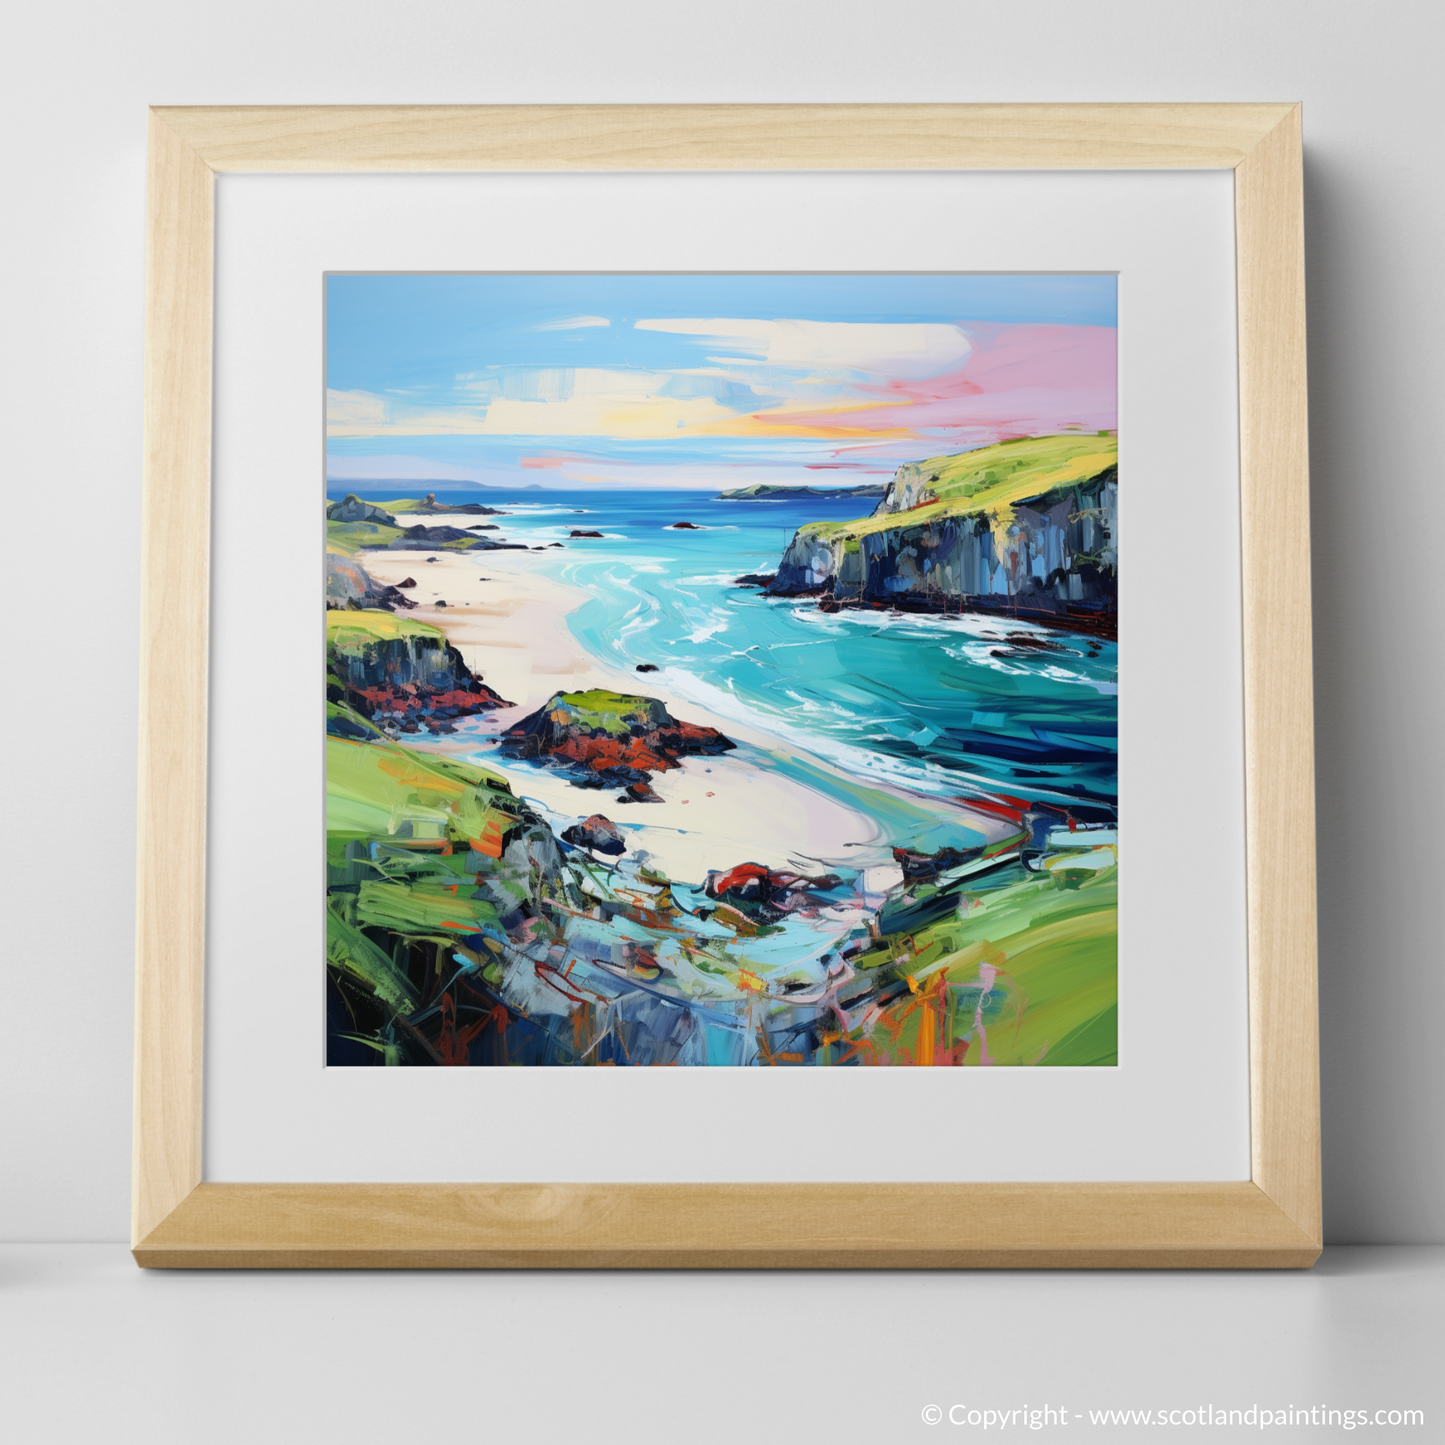 Art Print of Kiloran Bay, Isle of Colonsay with a natural frame